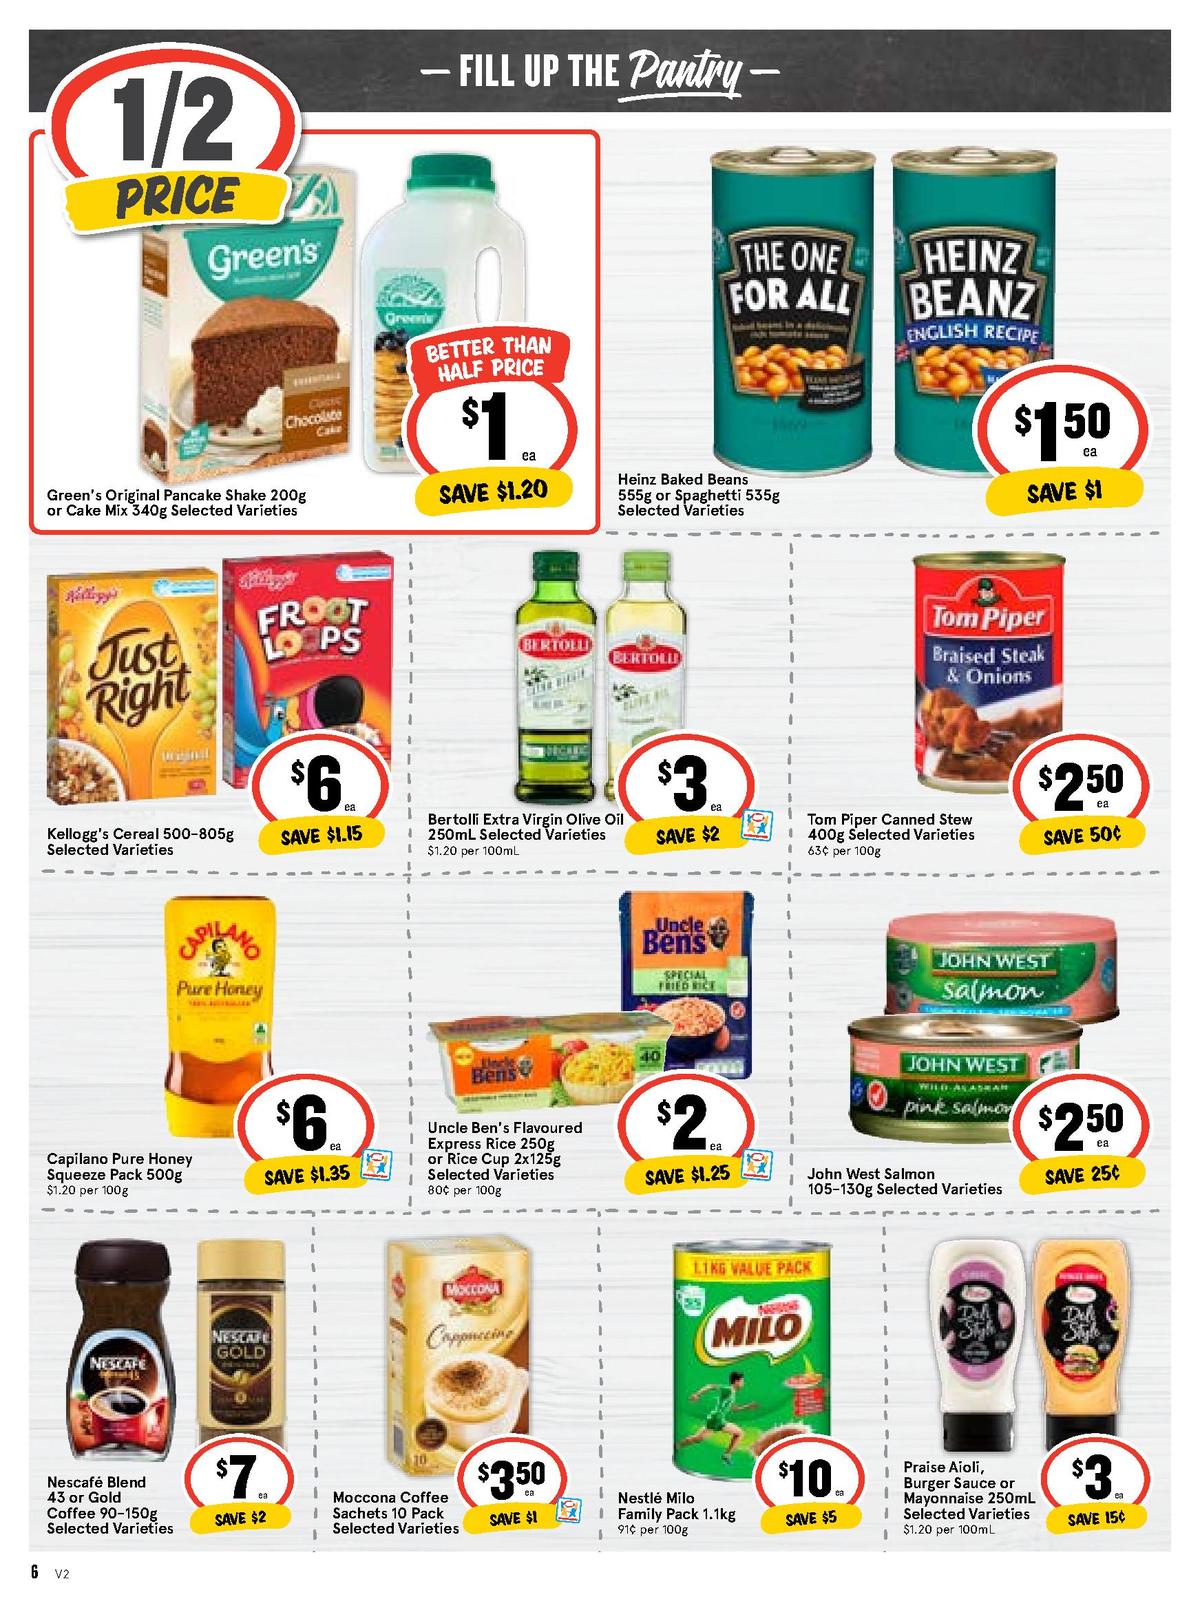 IGA Catalogues from 3 July